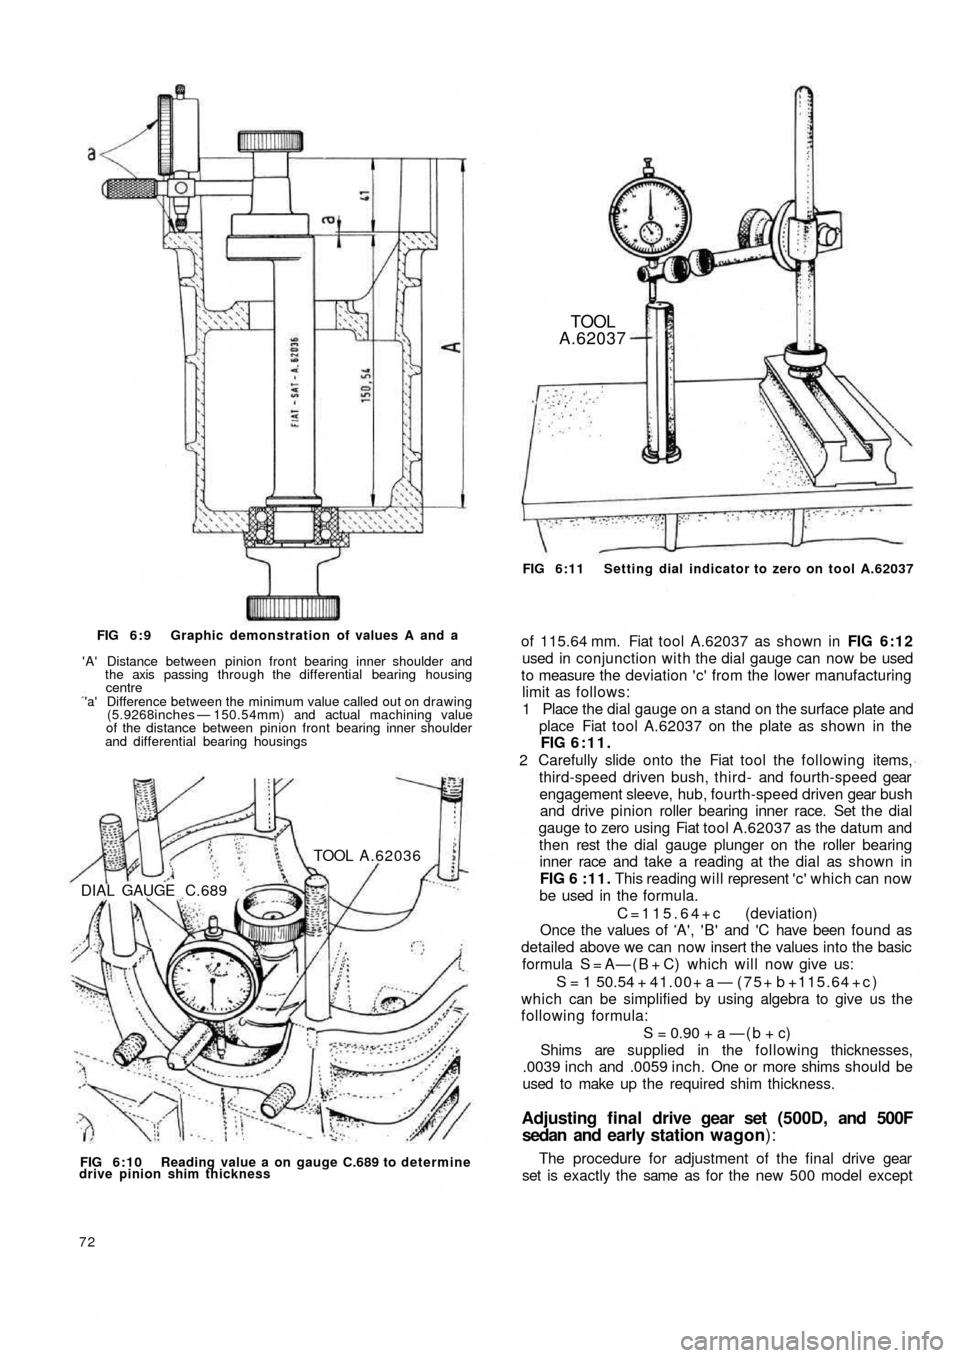 FIAT 500 1971 1.G Workshop Manual FIG 6:9  Graphic demonstration of values A and a
A Distance between pinion front bearing inner shoulder and
the axis passing through the differential bearing housing
centrea Difference between the